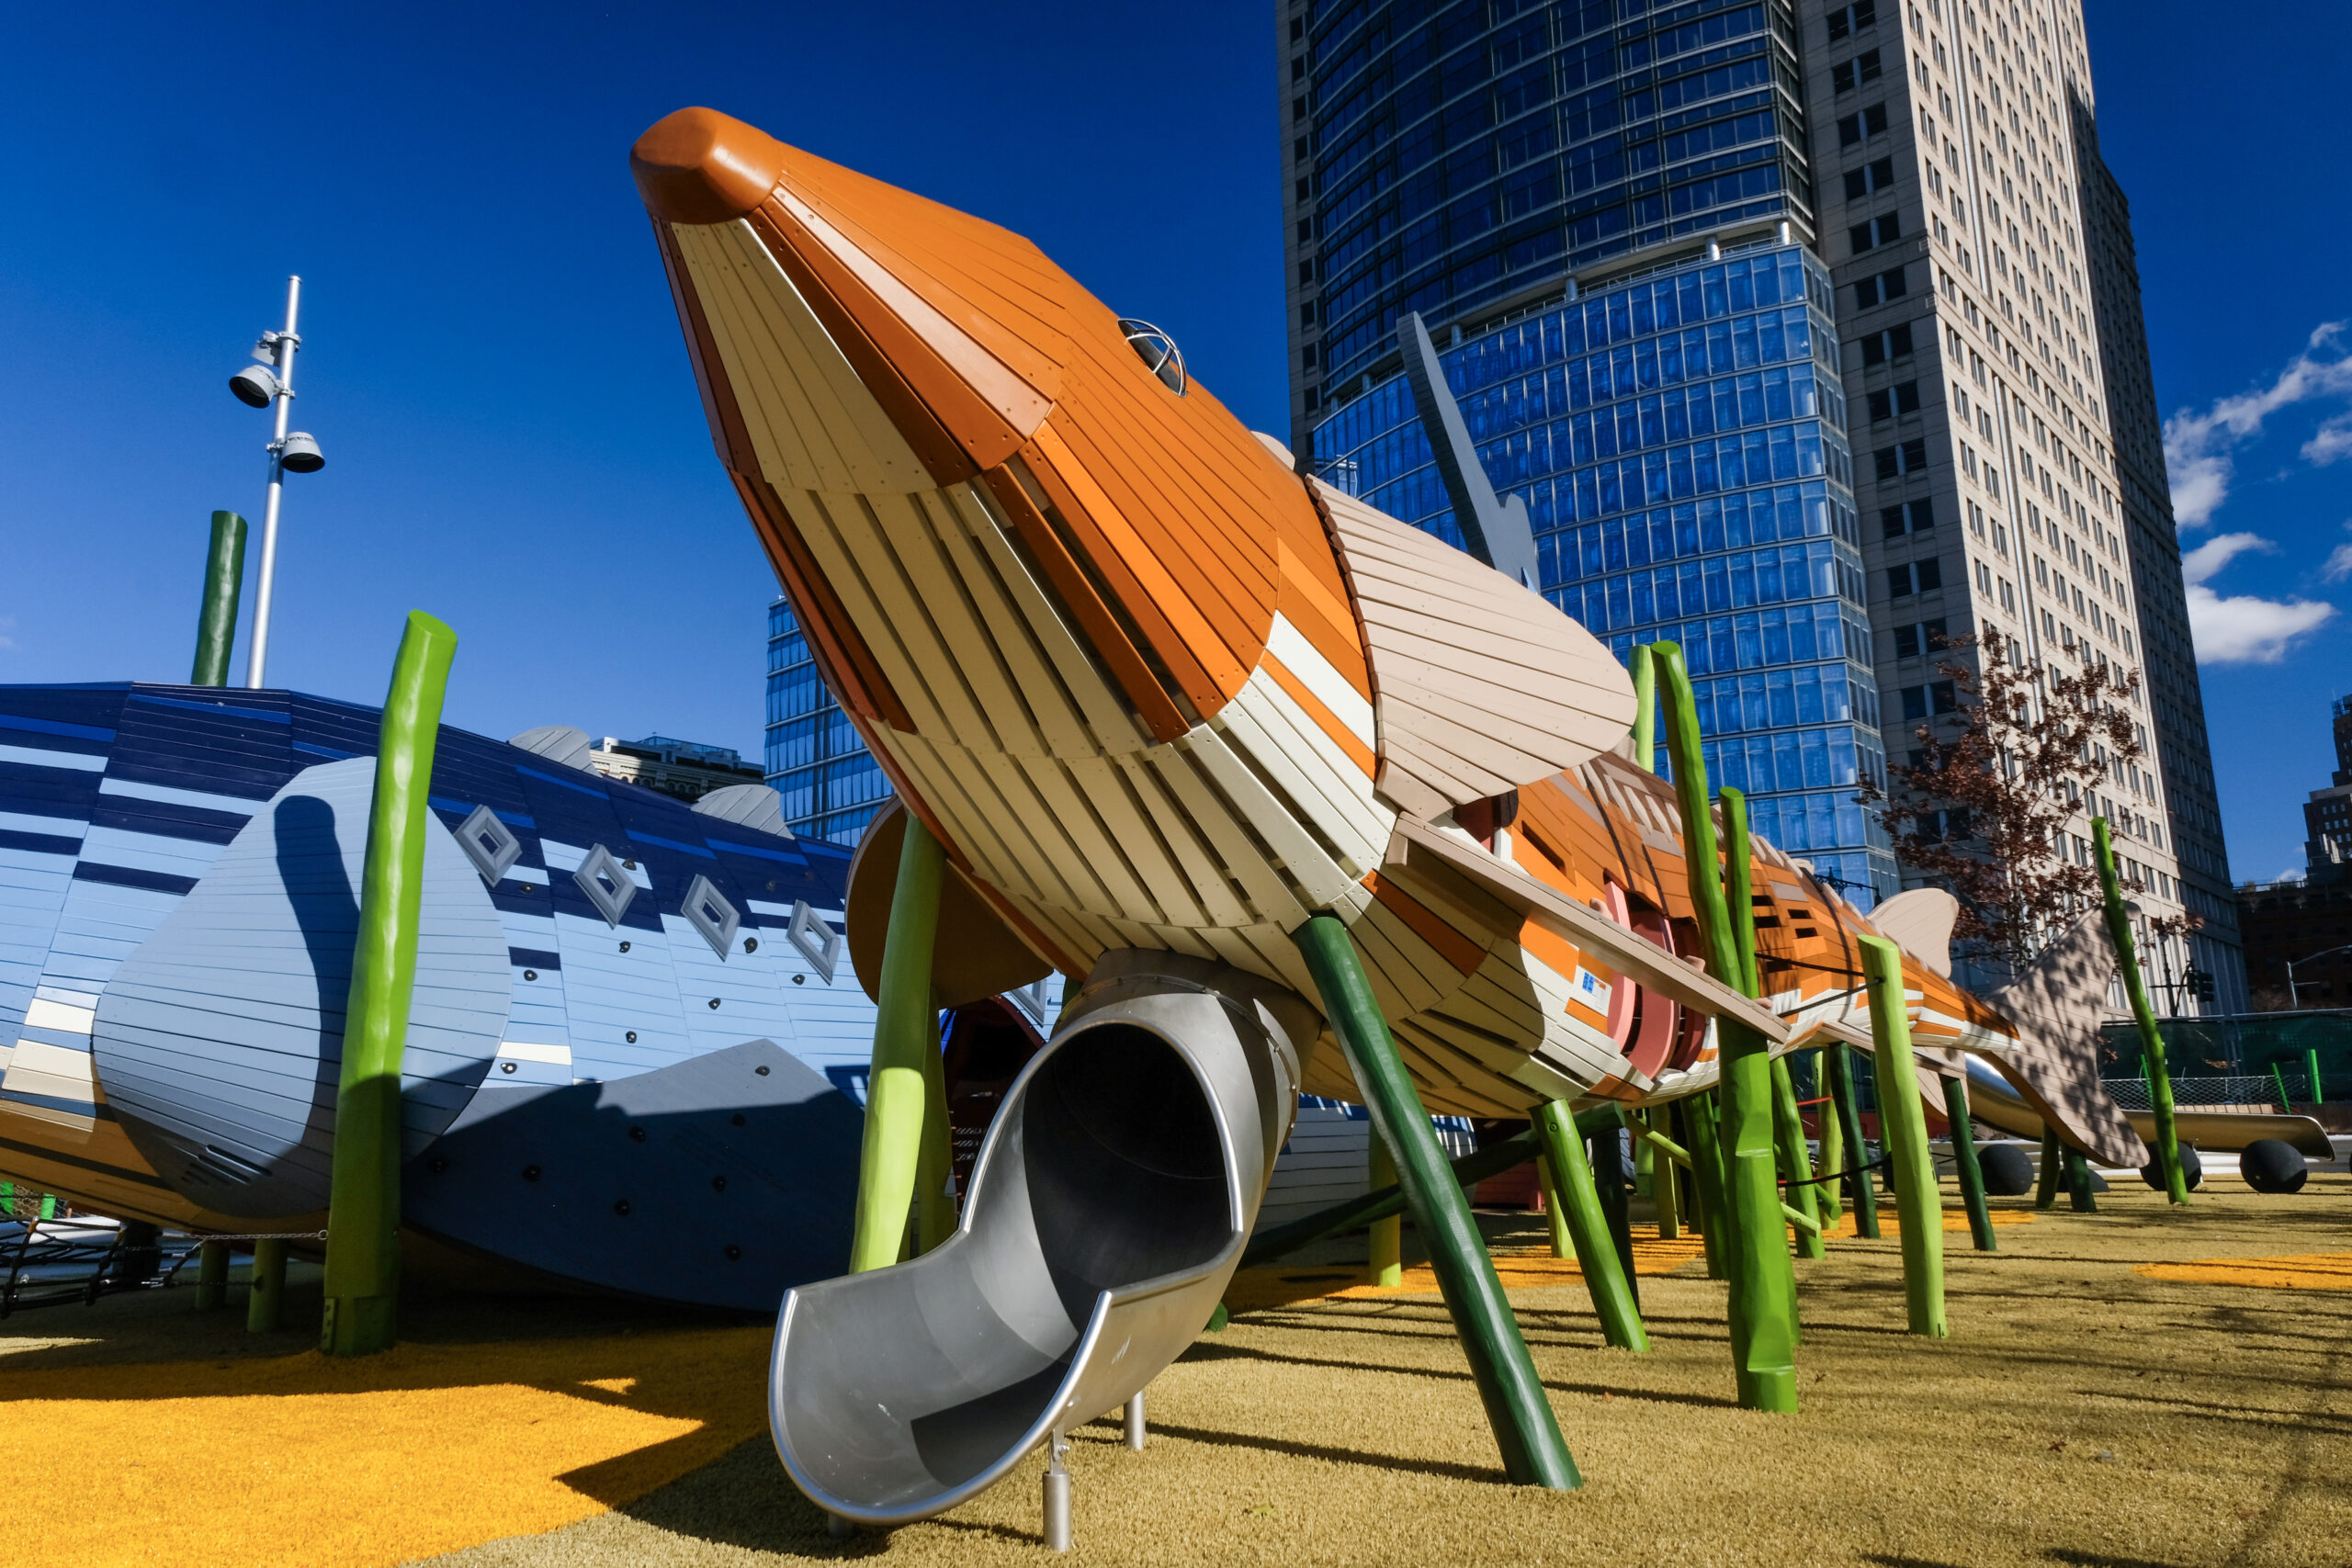 A playground structure shaped like a sturgeon with a slide coming out of its front at the Pier 26 Science Playground